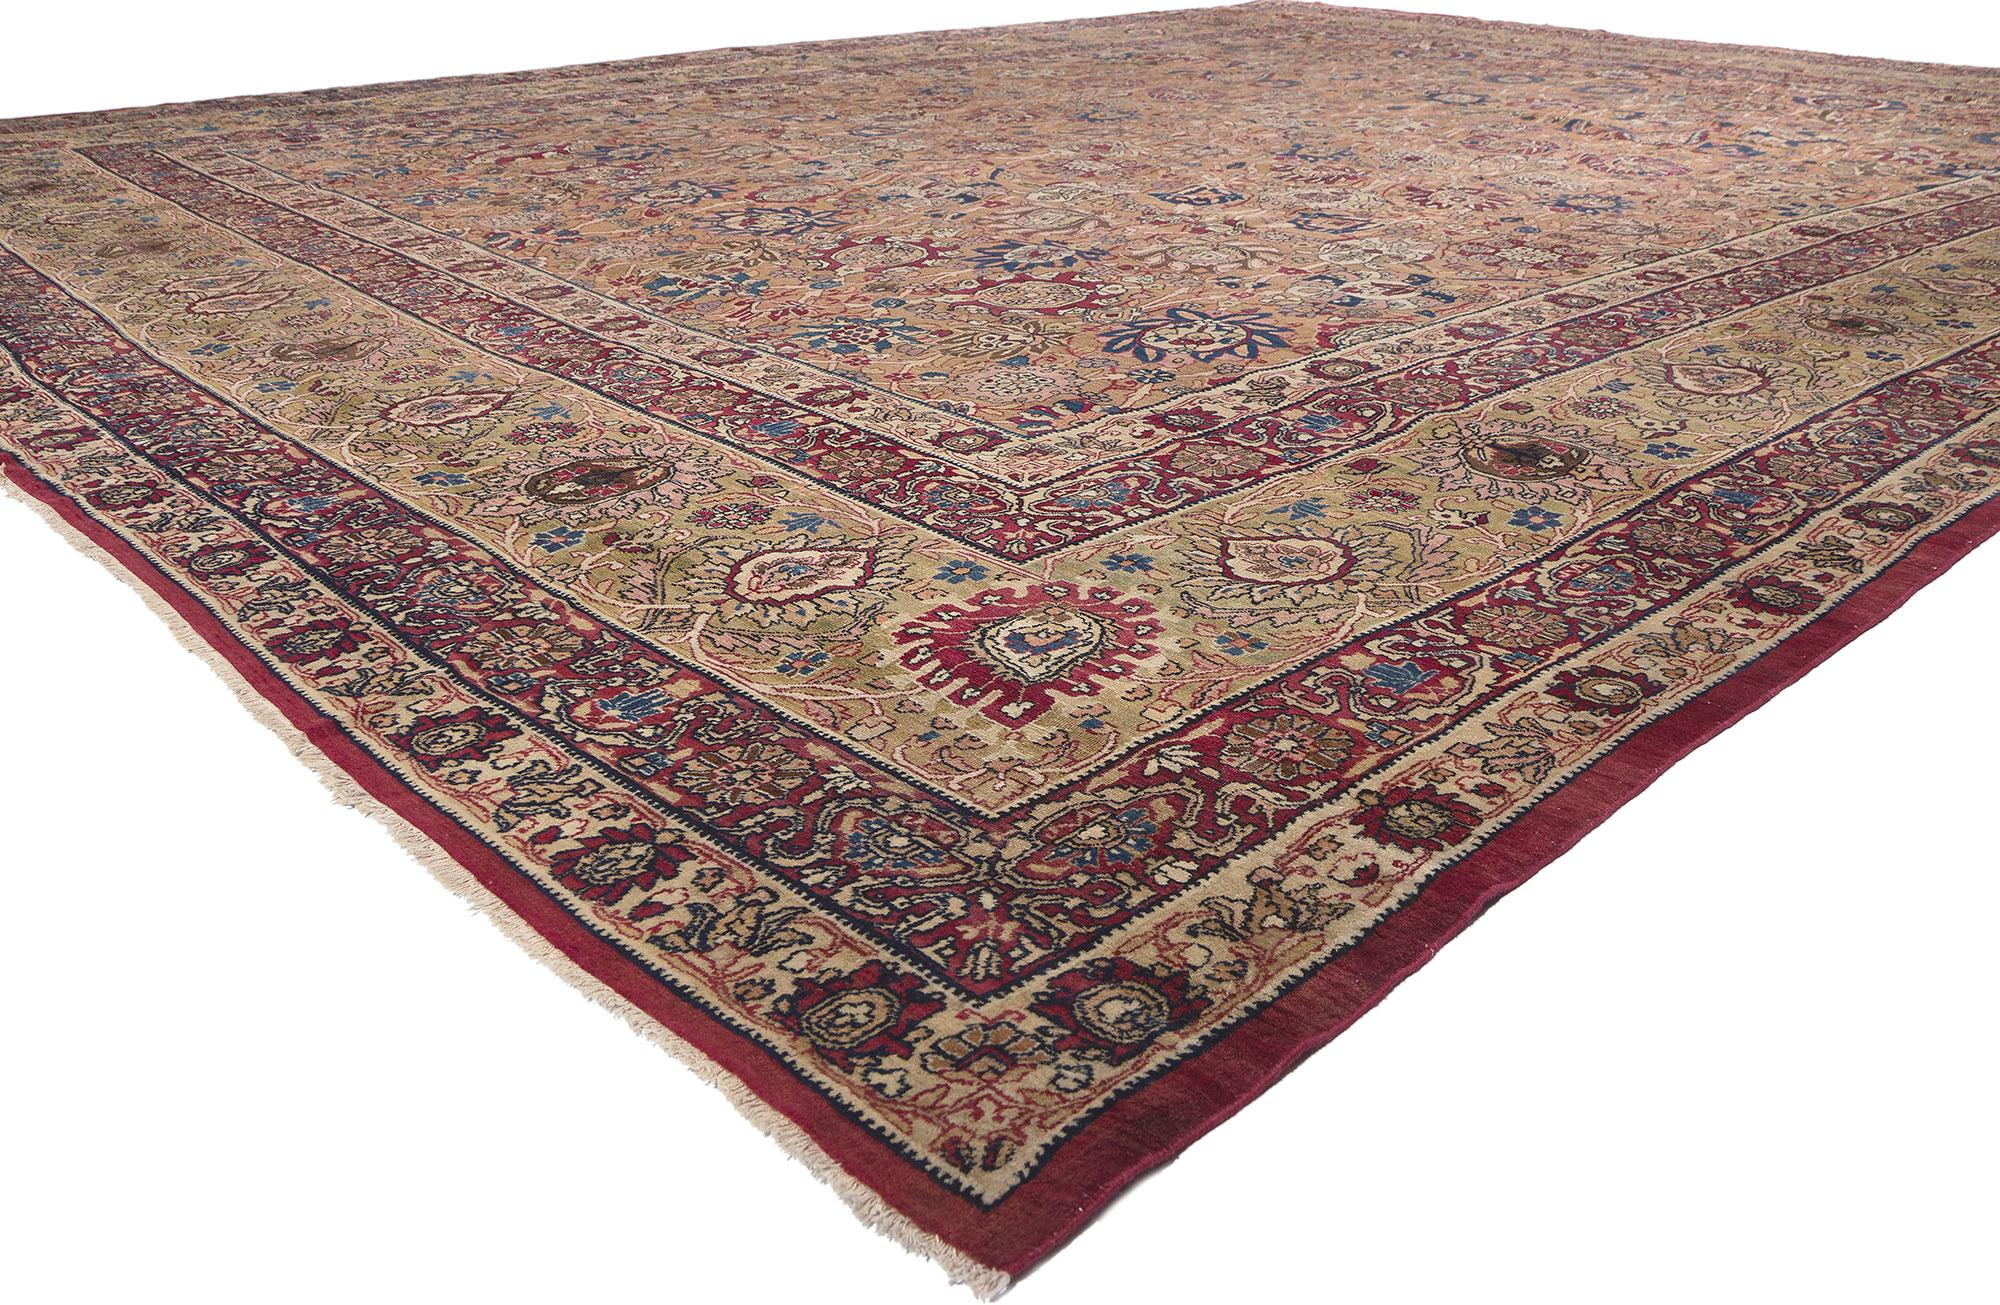 74298 Oversized Antique Persian Kermanshah Rug, 13'06 x 17'04. Embark on a journey where timeless elegance harmoniously converges with the principles of Biophilic Design in this hand-knotted wool antique Persian Kermanshah rug. Nature-inspired